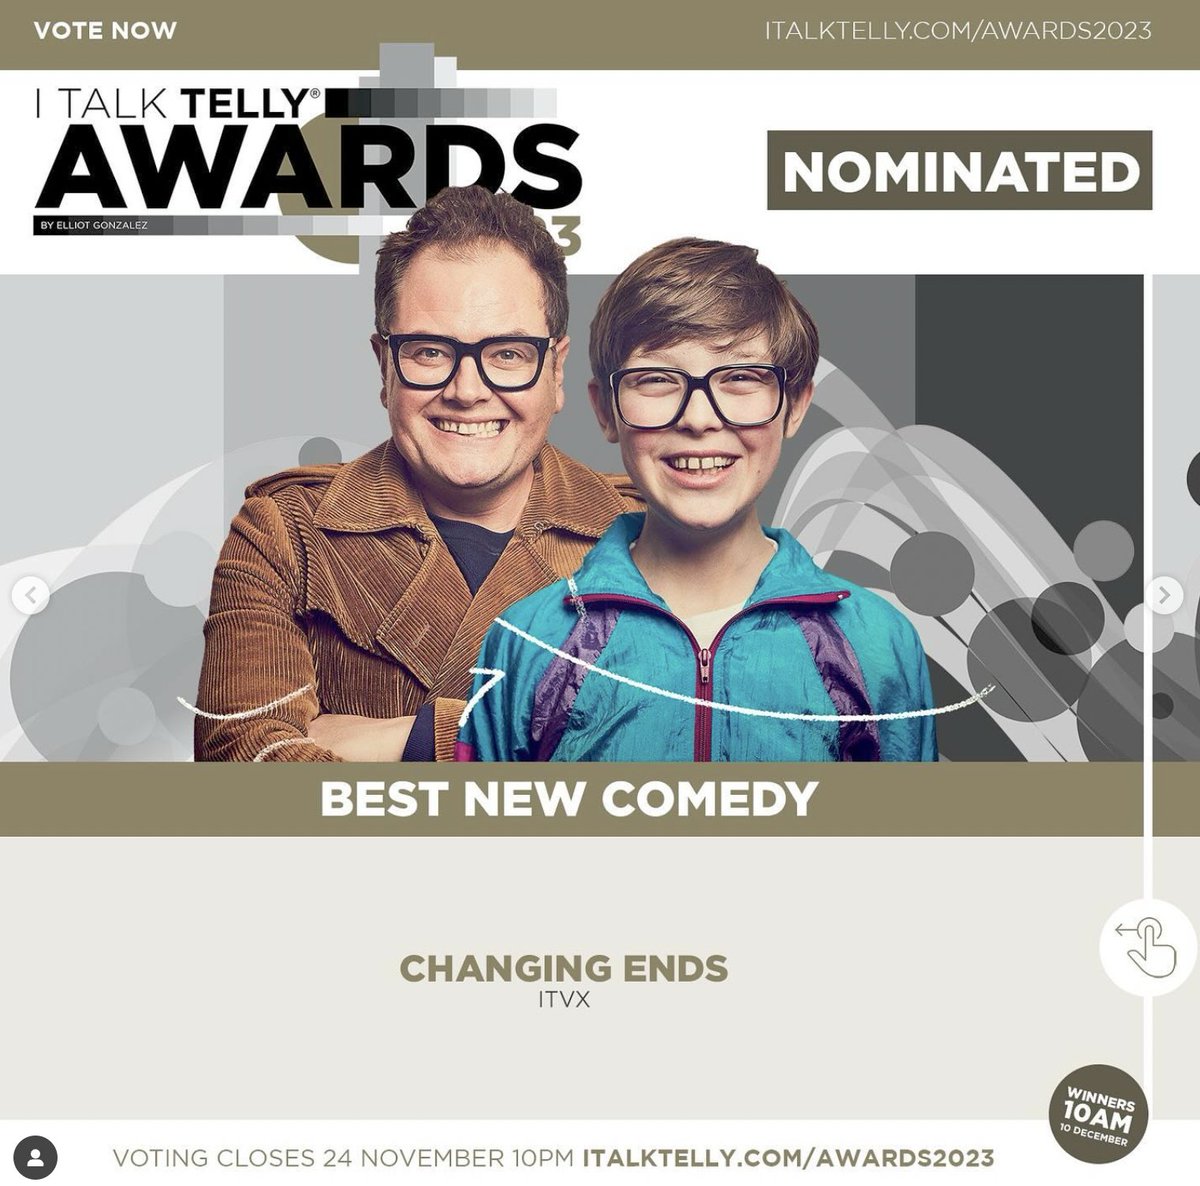 Changing Ends has been nominated for Best New Comedy at the #ITalkTellyAwards 2023! 👏👏 Voting is open until 24th November, please follow this link italktelly.com/awards2023 Winners announced 10th December! @ITVX @chattyman